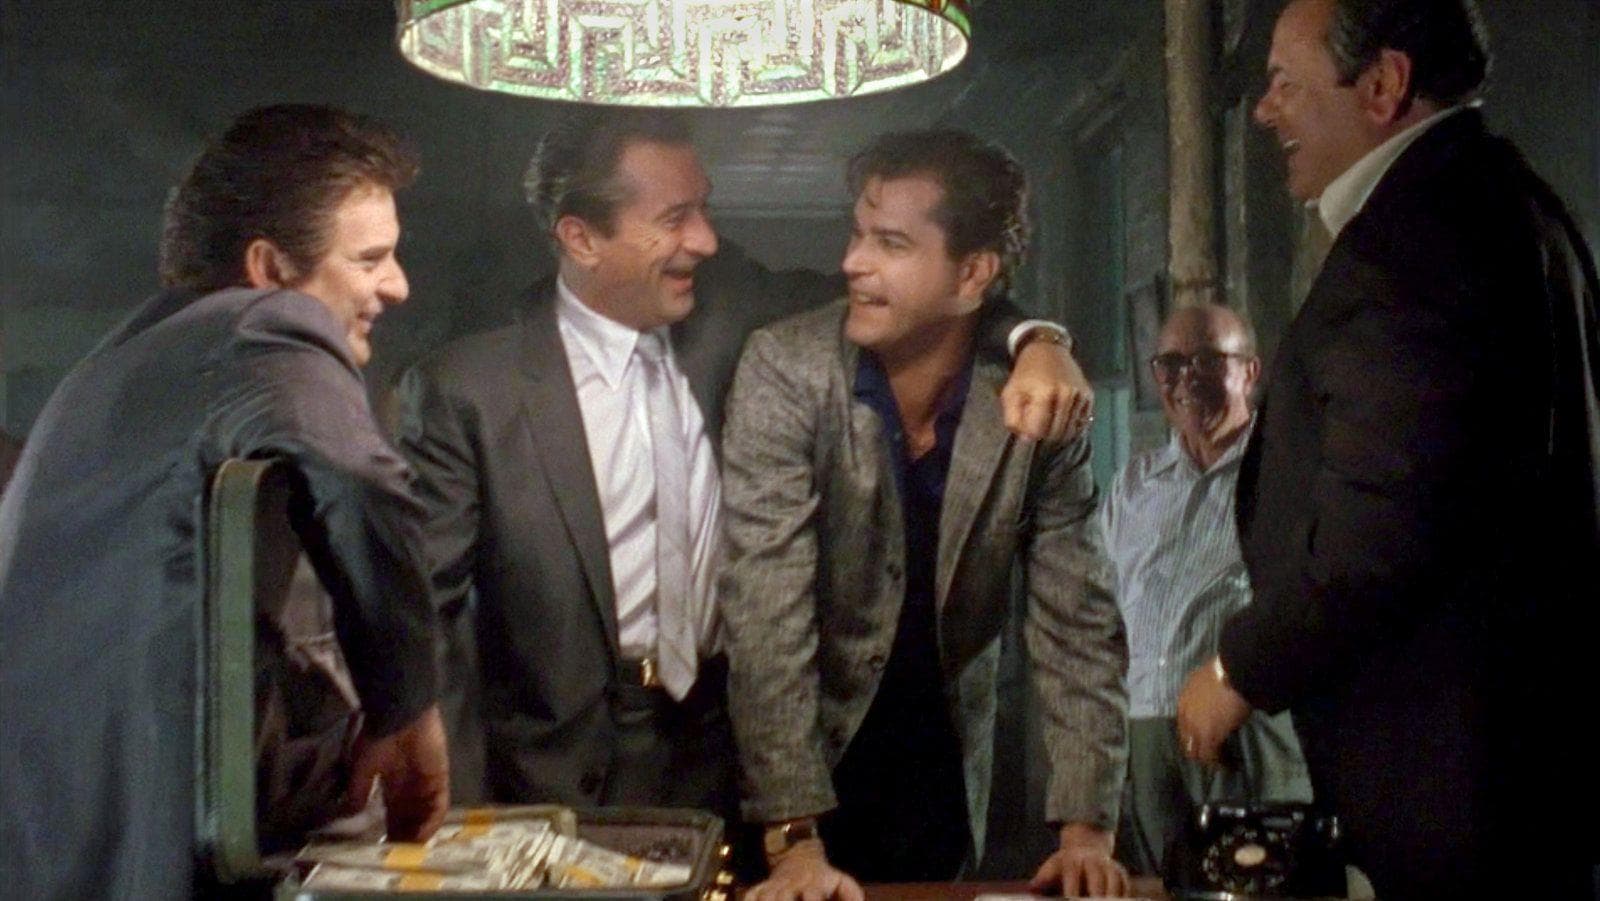 Image of Random Behind-The-Scenes Stories From The Making Of 'Goodfellas'